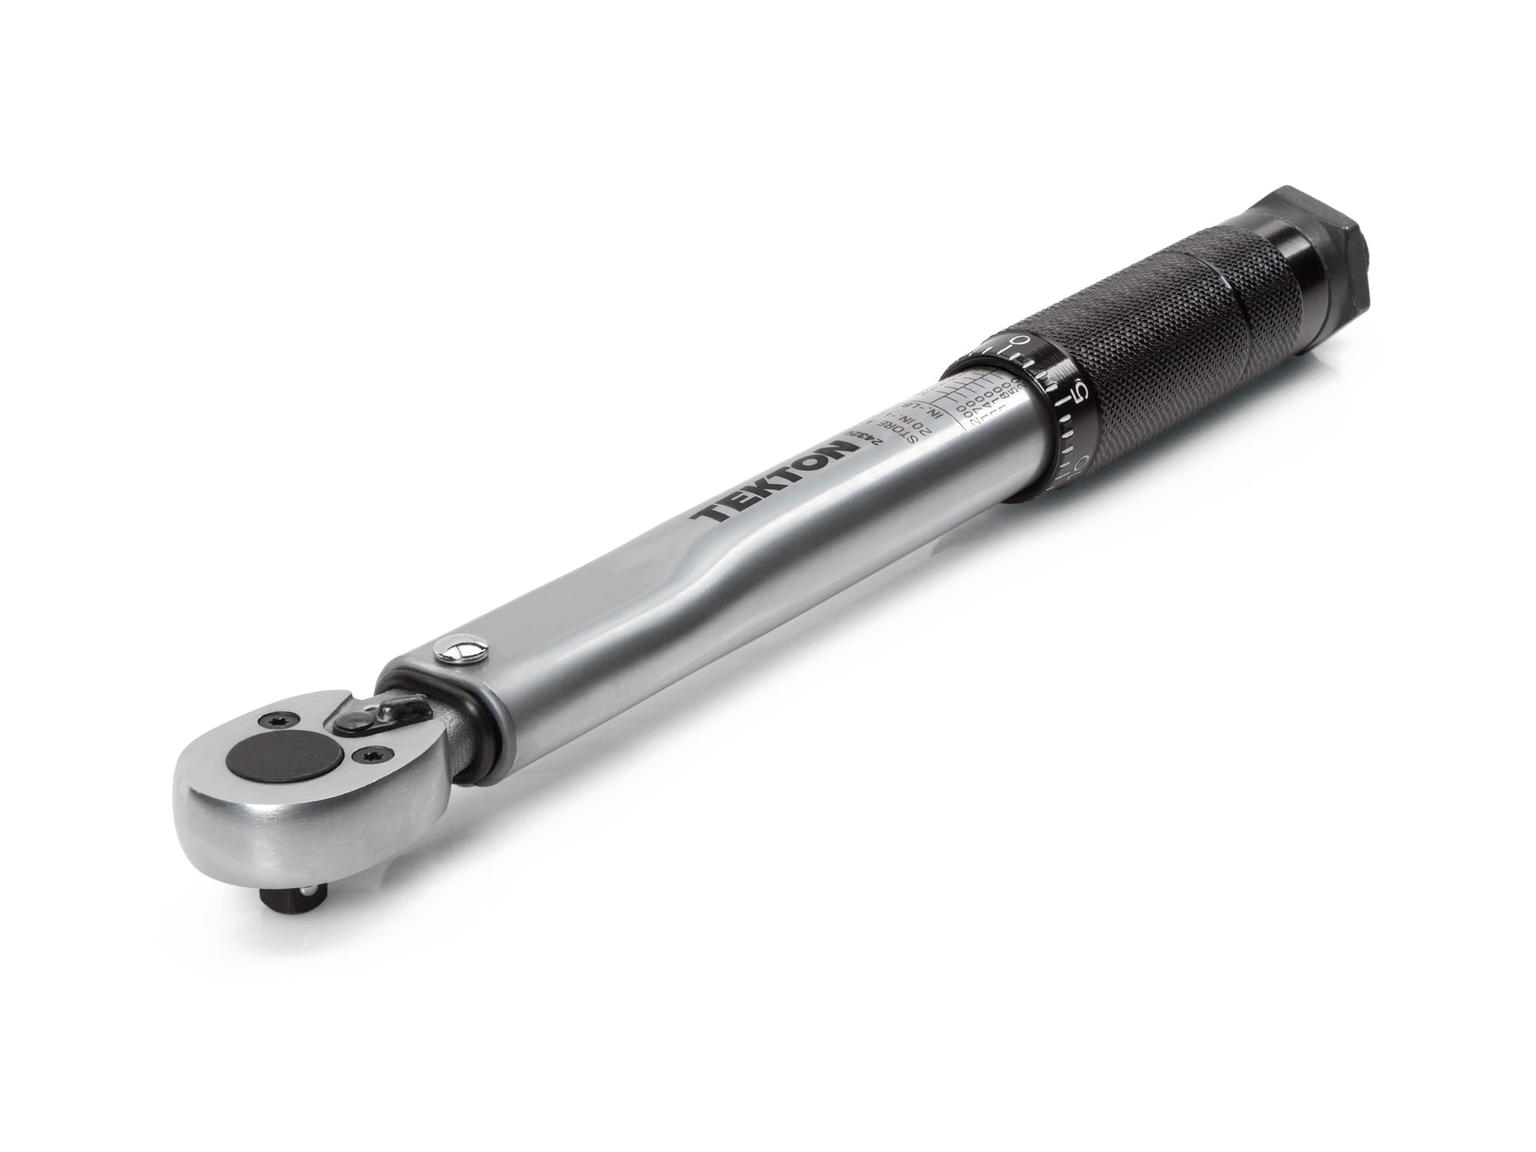 1/4 Inch Drive Micrometer Torque Wrench (20-200 in.-lb.)